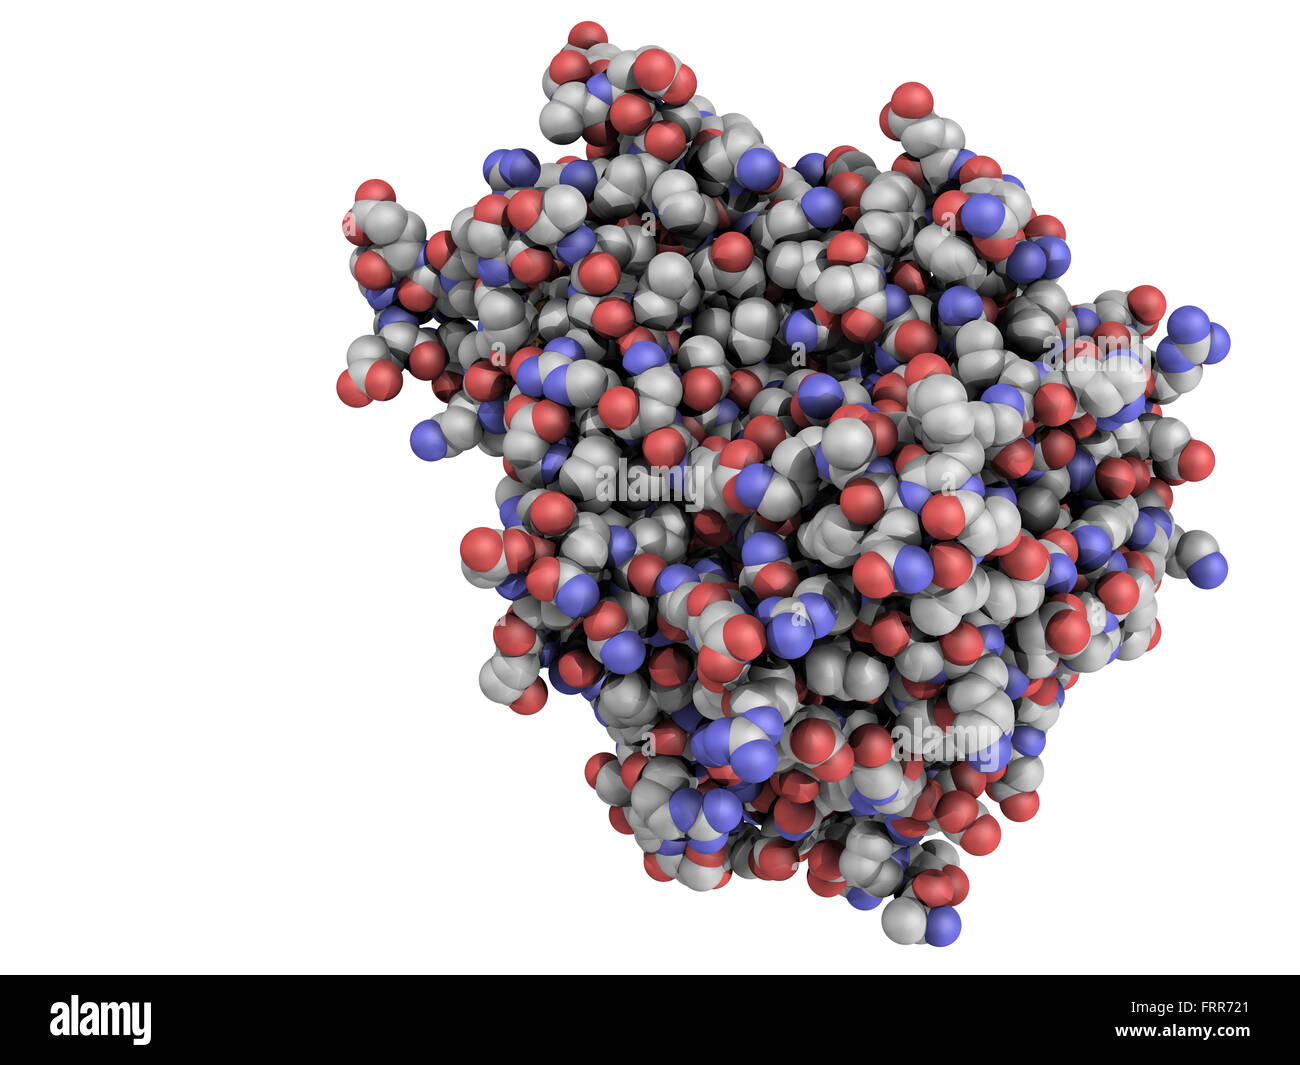 Tumor necrosis factor (TNF, cachexin, cachectin) protein, a cytokine that plays an important role in inflammation and immunity. Stock Photo